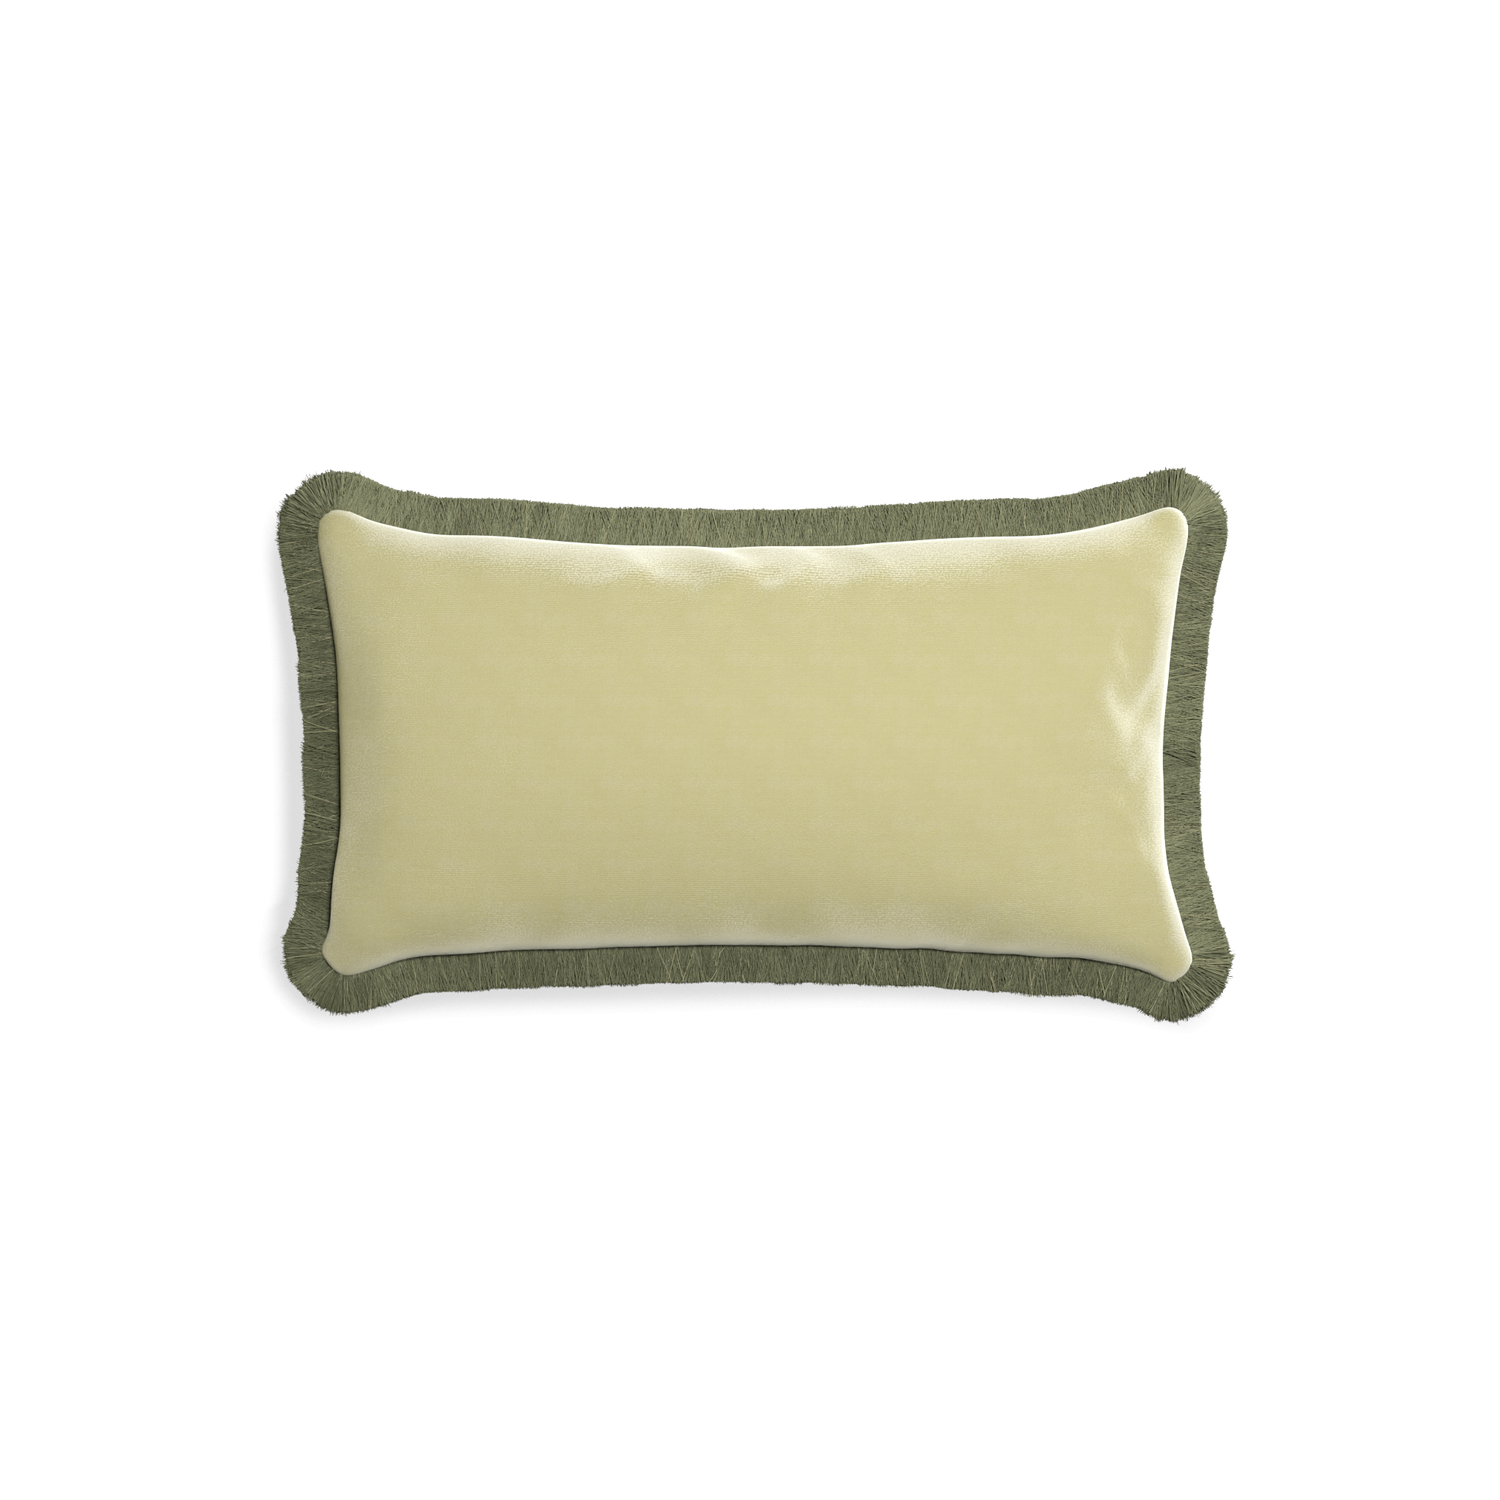 rectangle light green pillow with sage green fringe